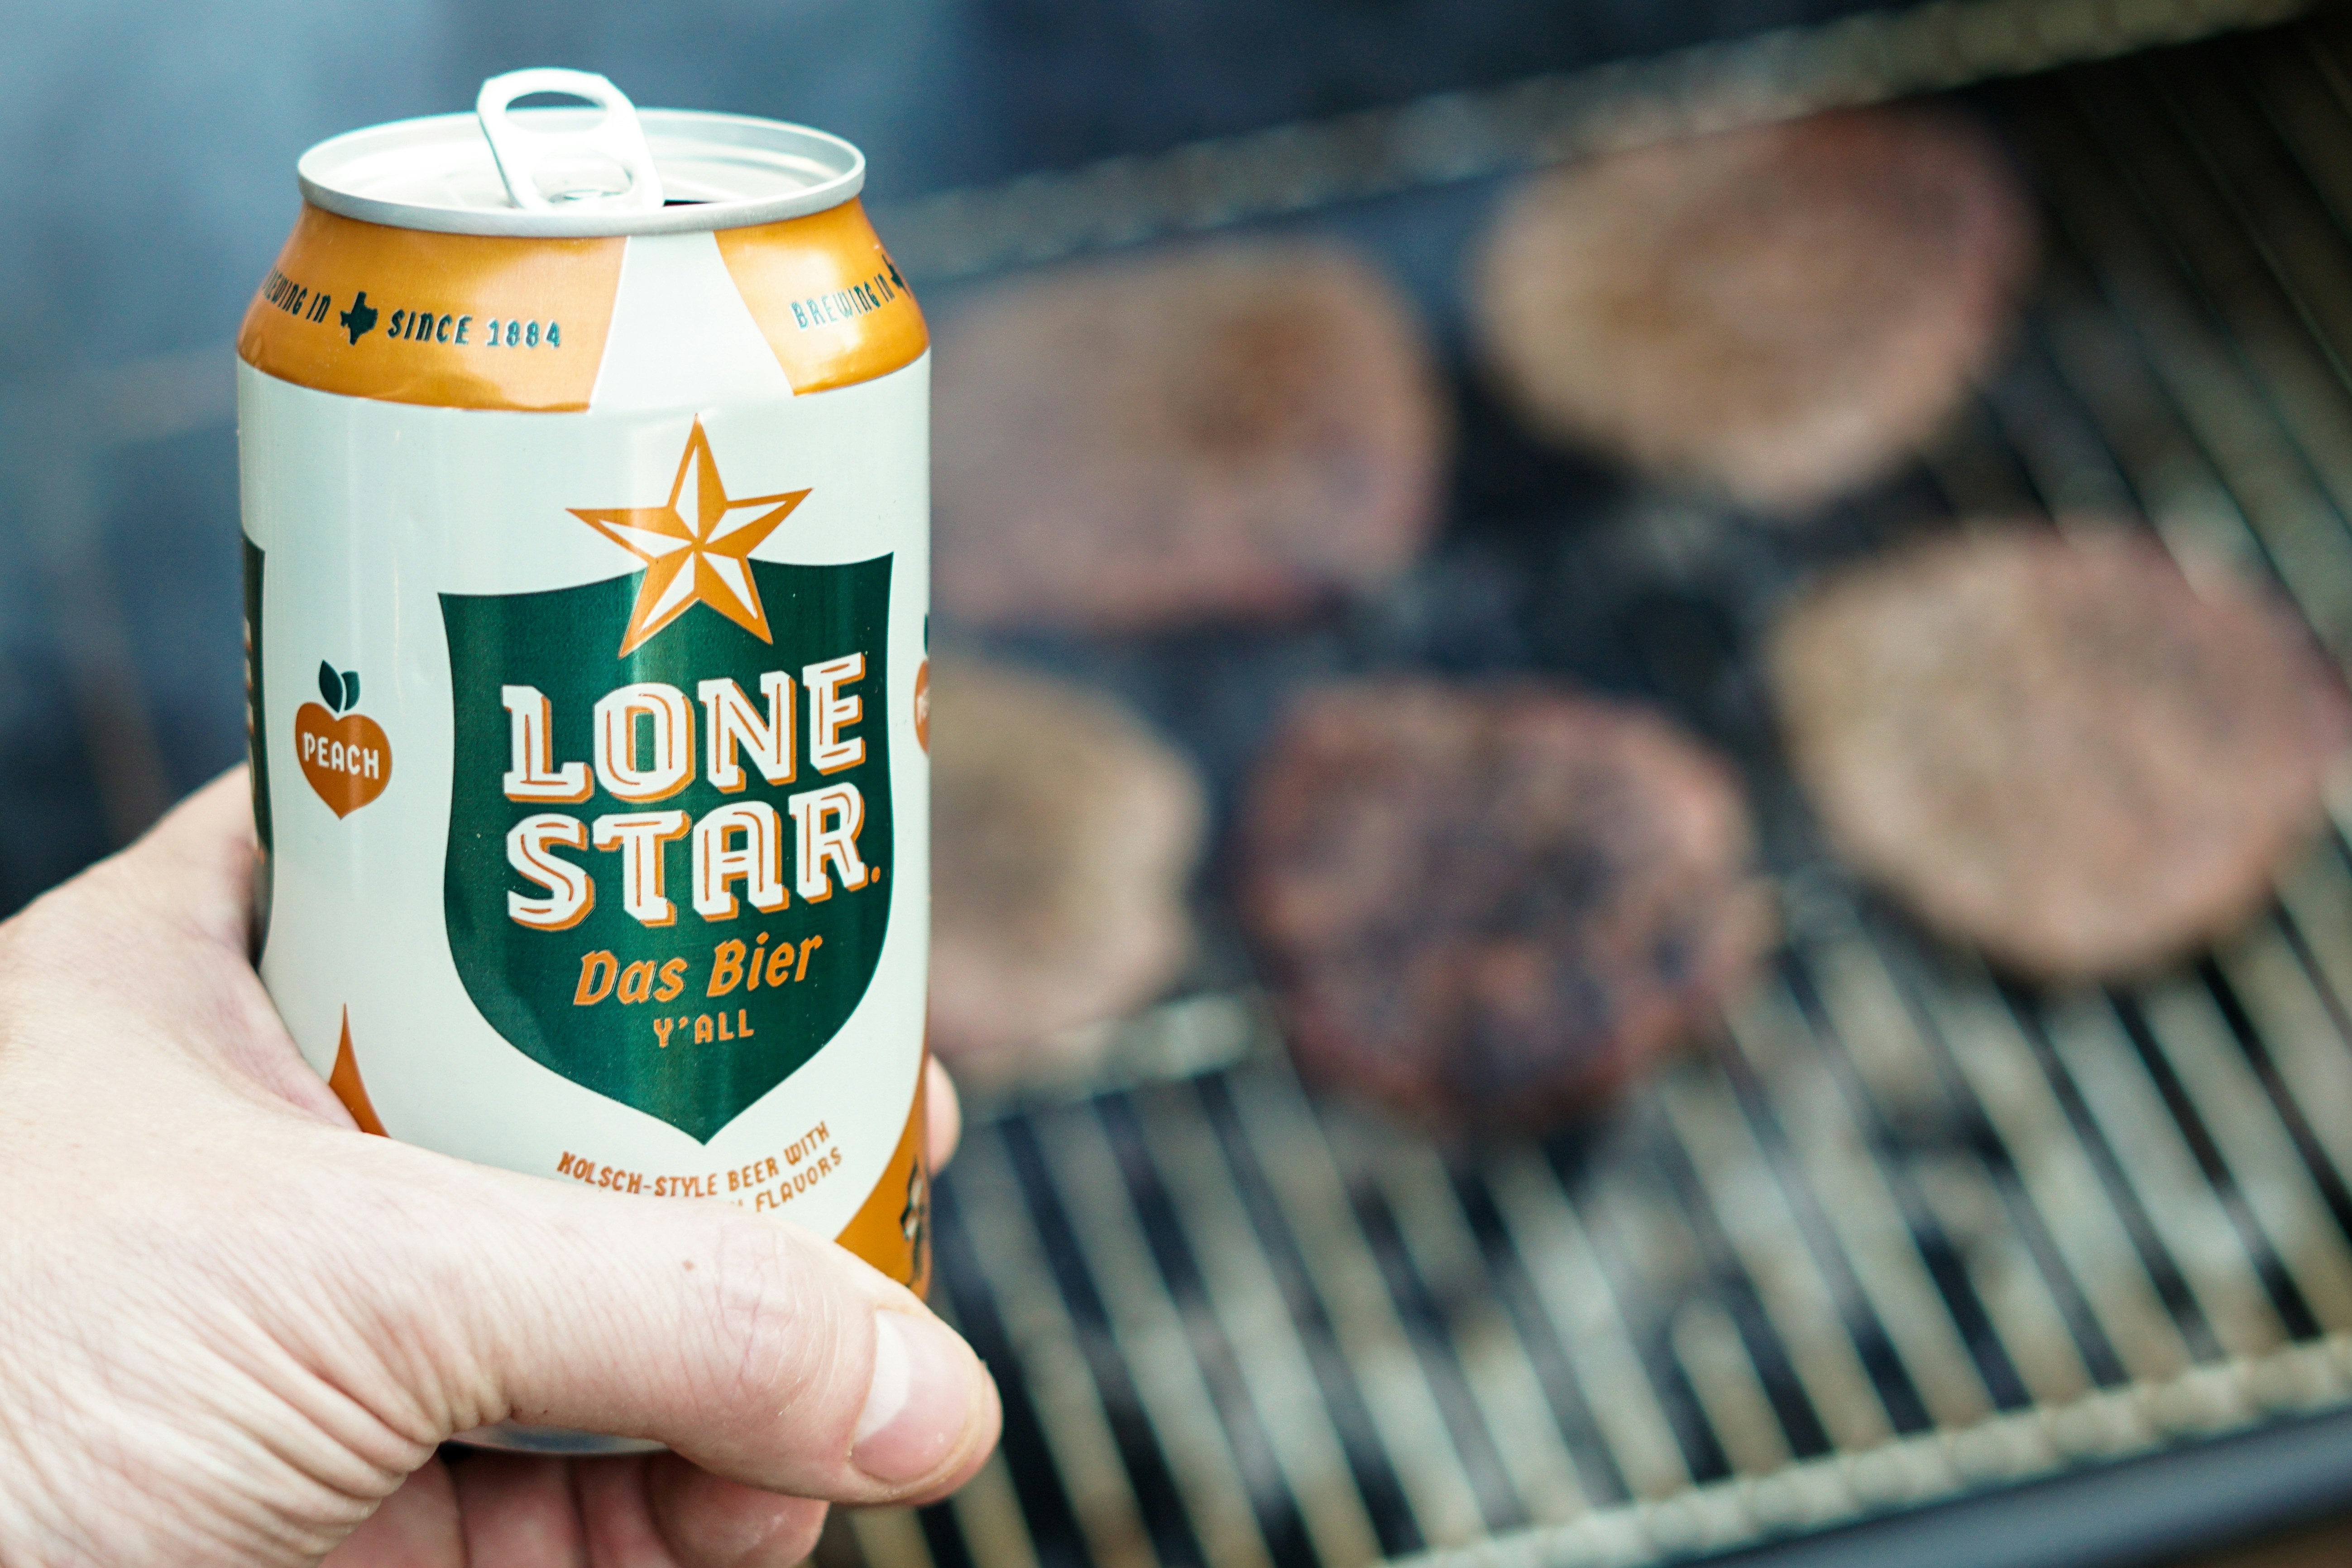 Holding a ice cold Lone Star Beer from Texas outside while grilling hamburgers on a smokey outdoor charcoal grill.